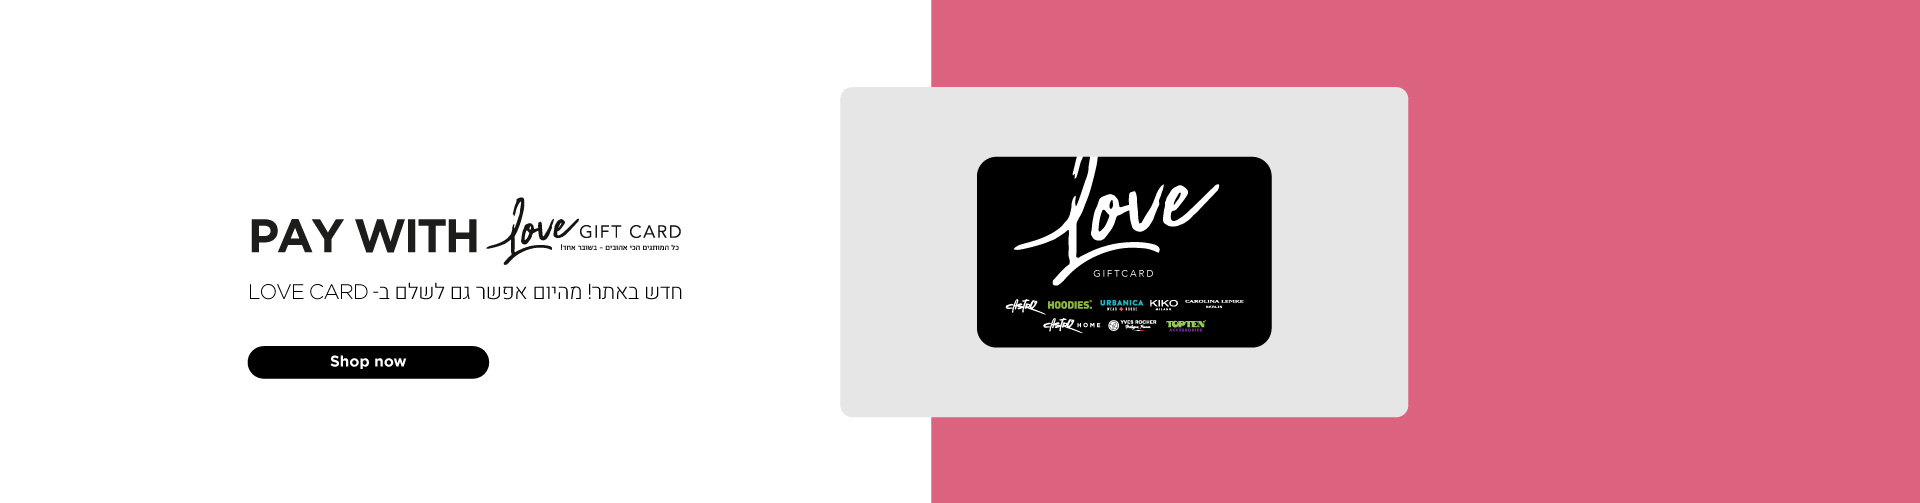 PAY WITH LOVE GIFT CARD